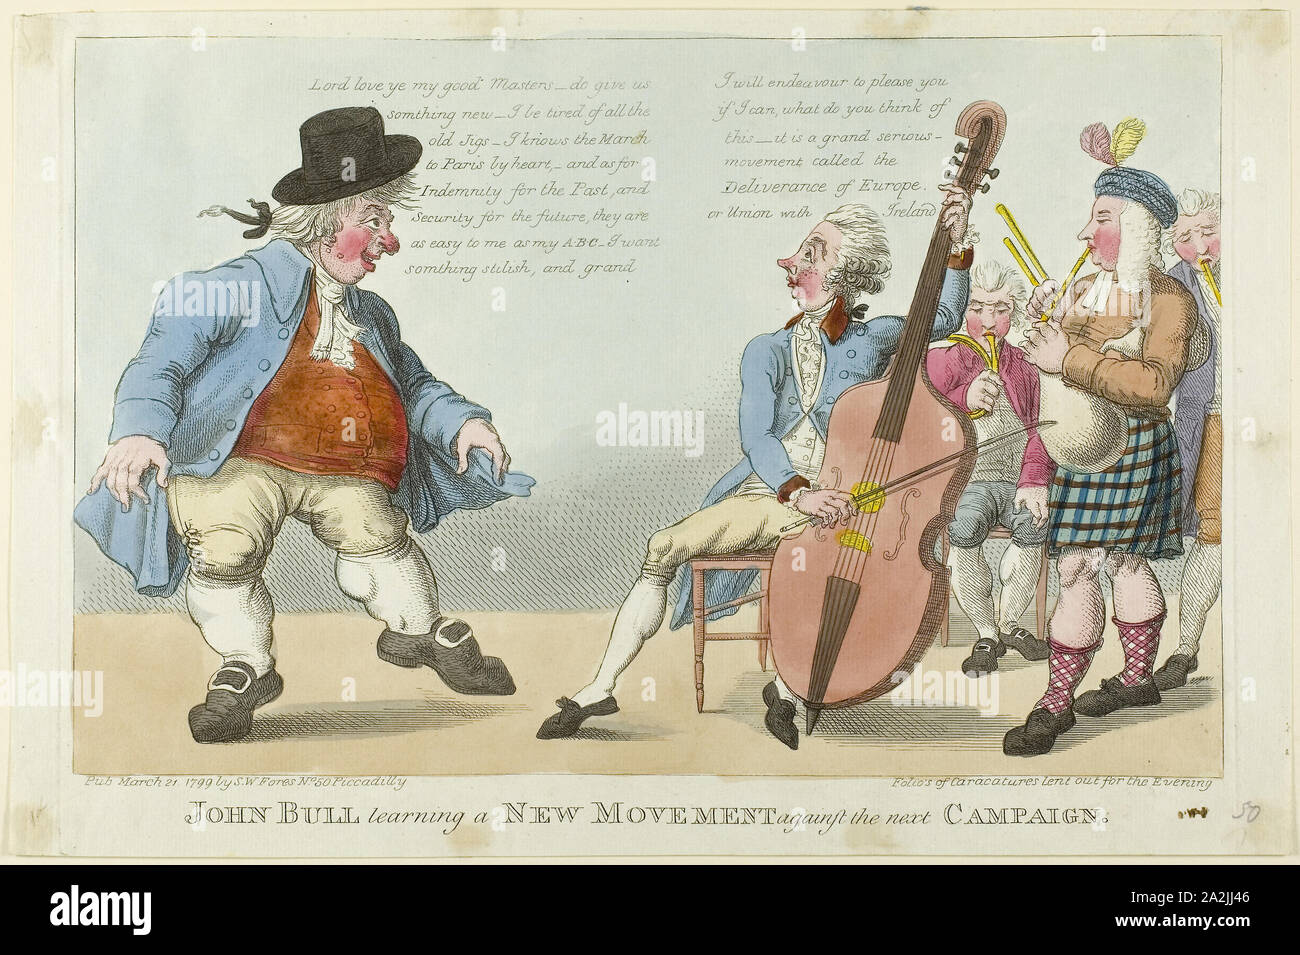 John Bull Learning a New Movement, published March 21, 1799, Unknown Artist (English, late 18th-early 19th centuries), published by S. W. Fores (English, active 1785-1825), England, Hand-colored etching on ivory laid paper, 259 × 391 mm (sheet Stock Photo